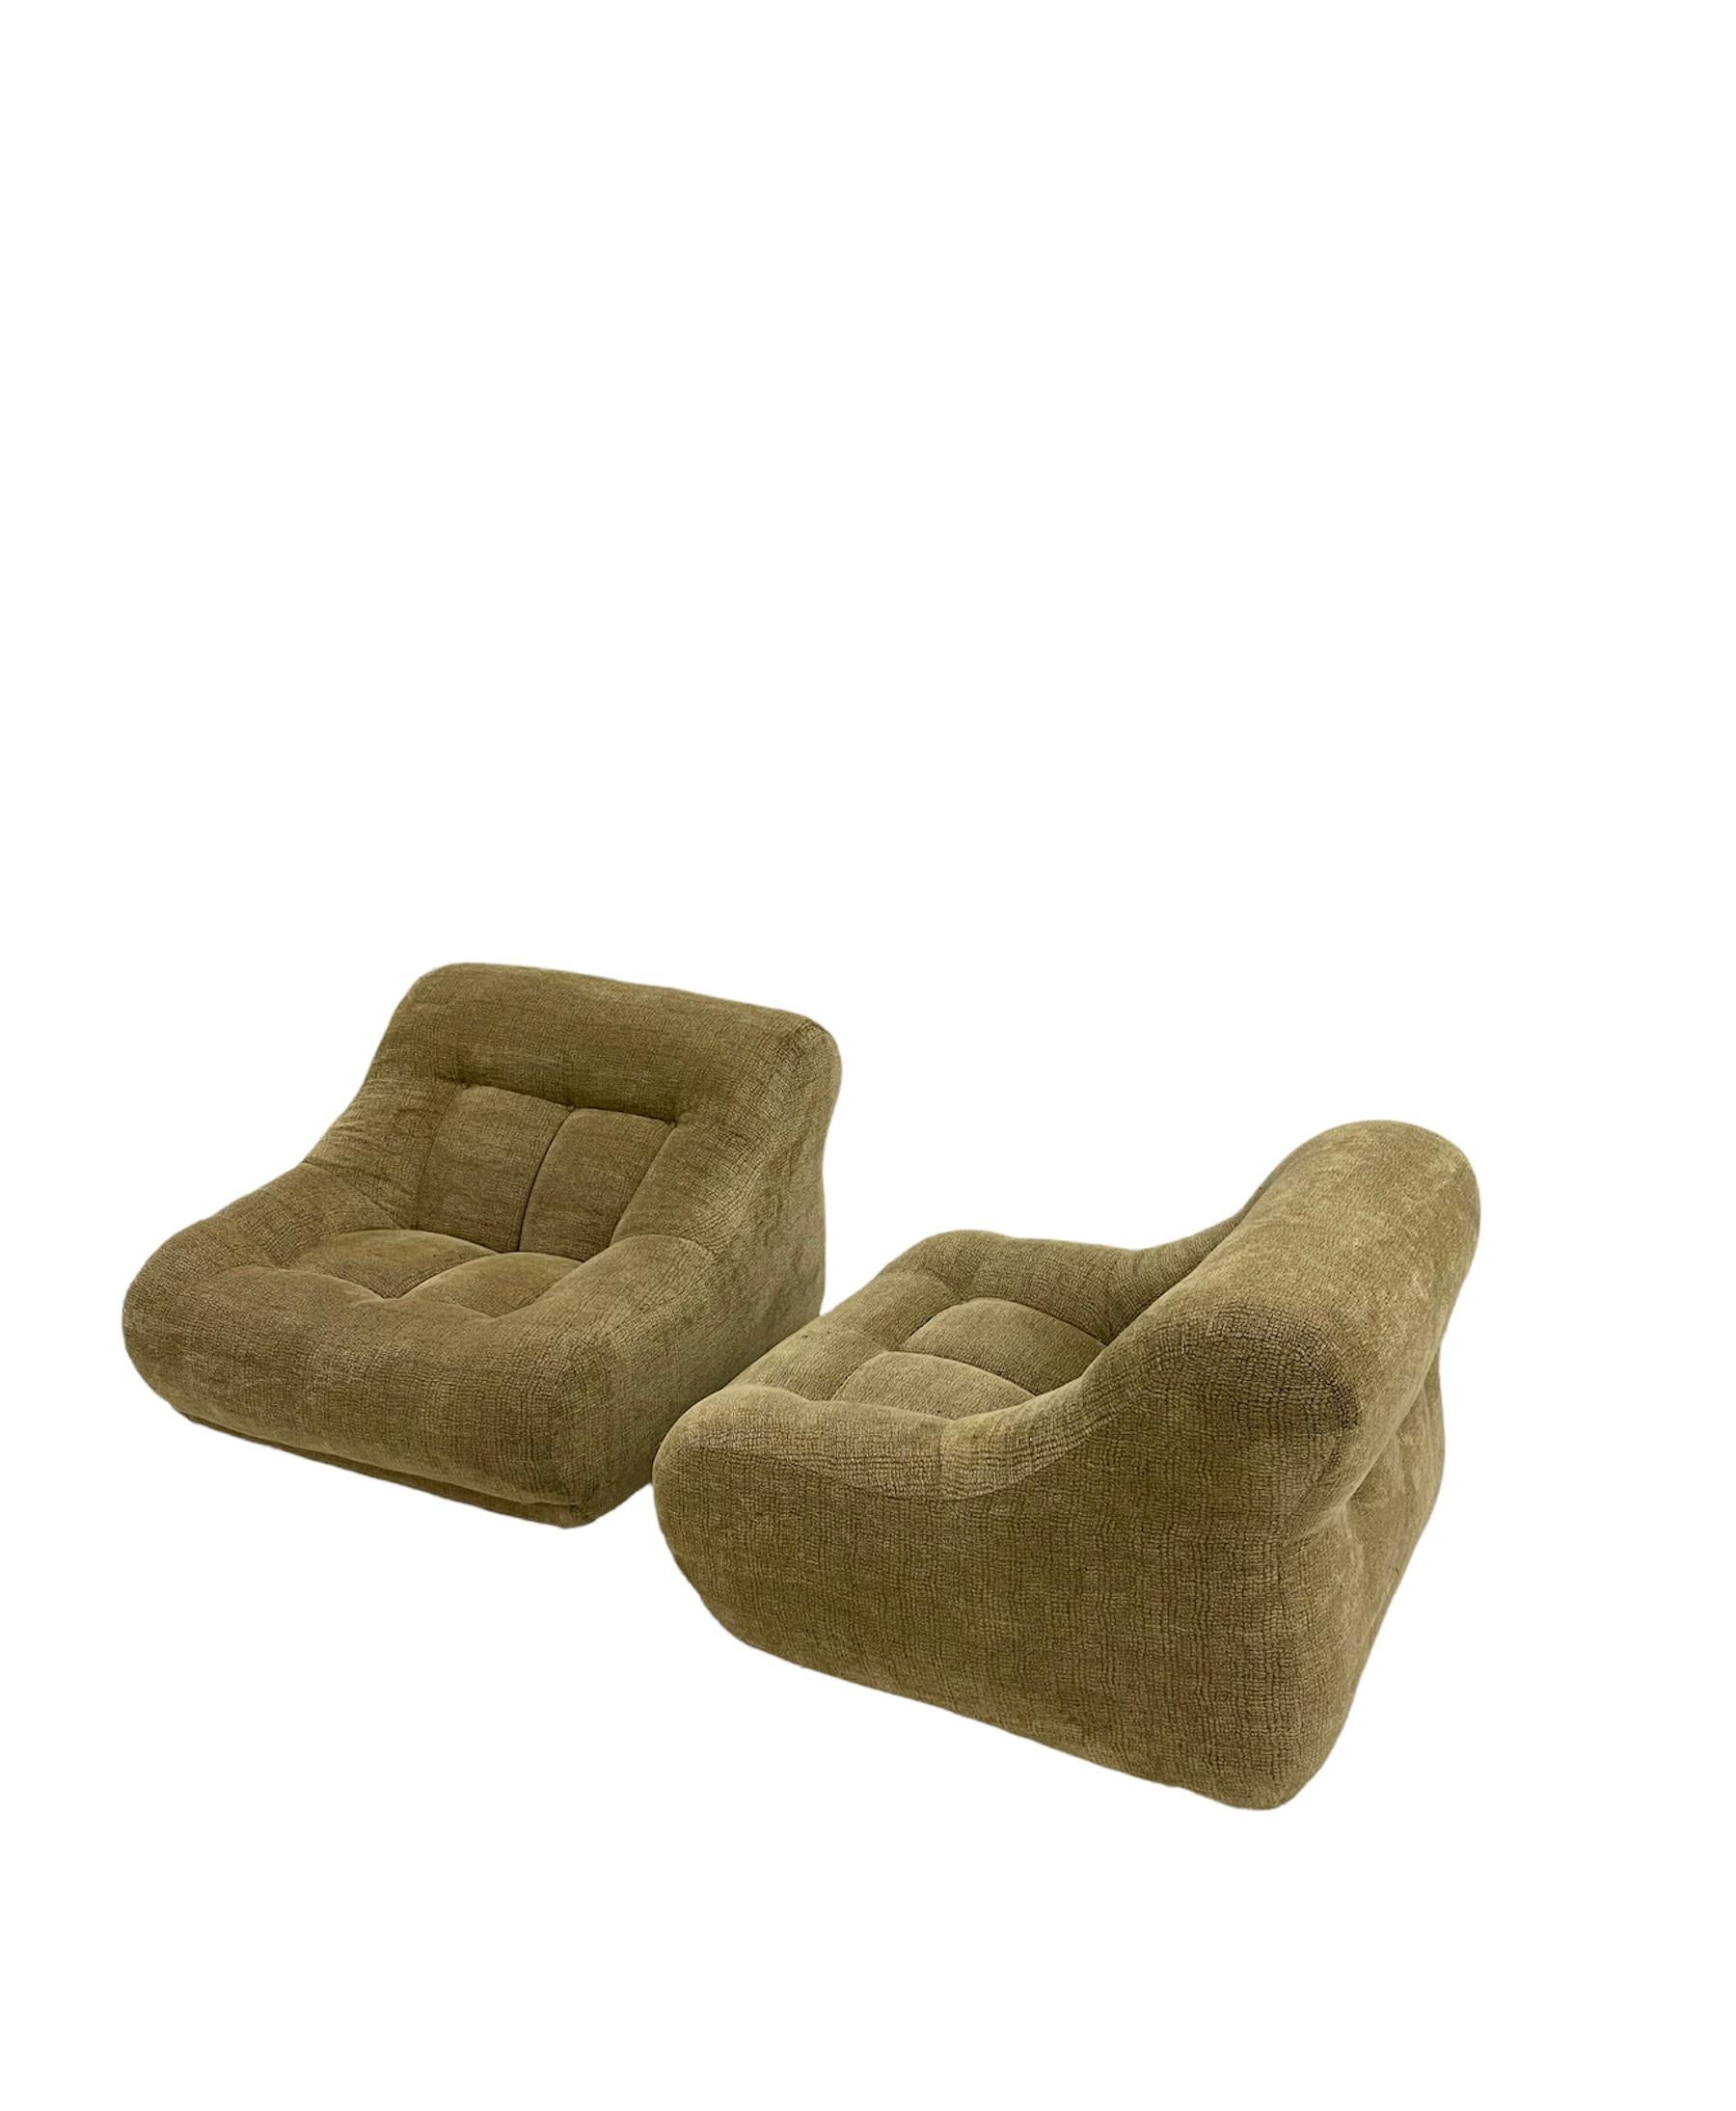 Space Age Nuvolone modular sofa by Rino Mature for Mimo Leone & Co - In the style of.

Two fabulous matching large club chairs. With sleek Space Age design, they instantly draw attention to any room. offering comfort and support, you might find